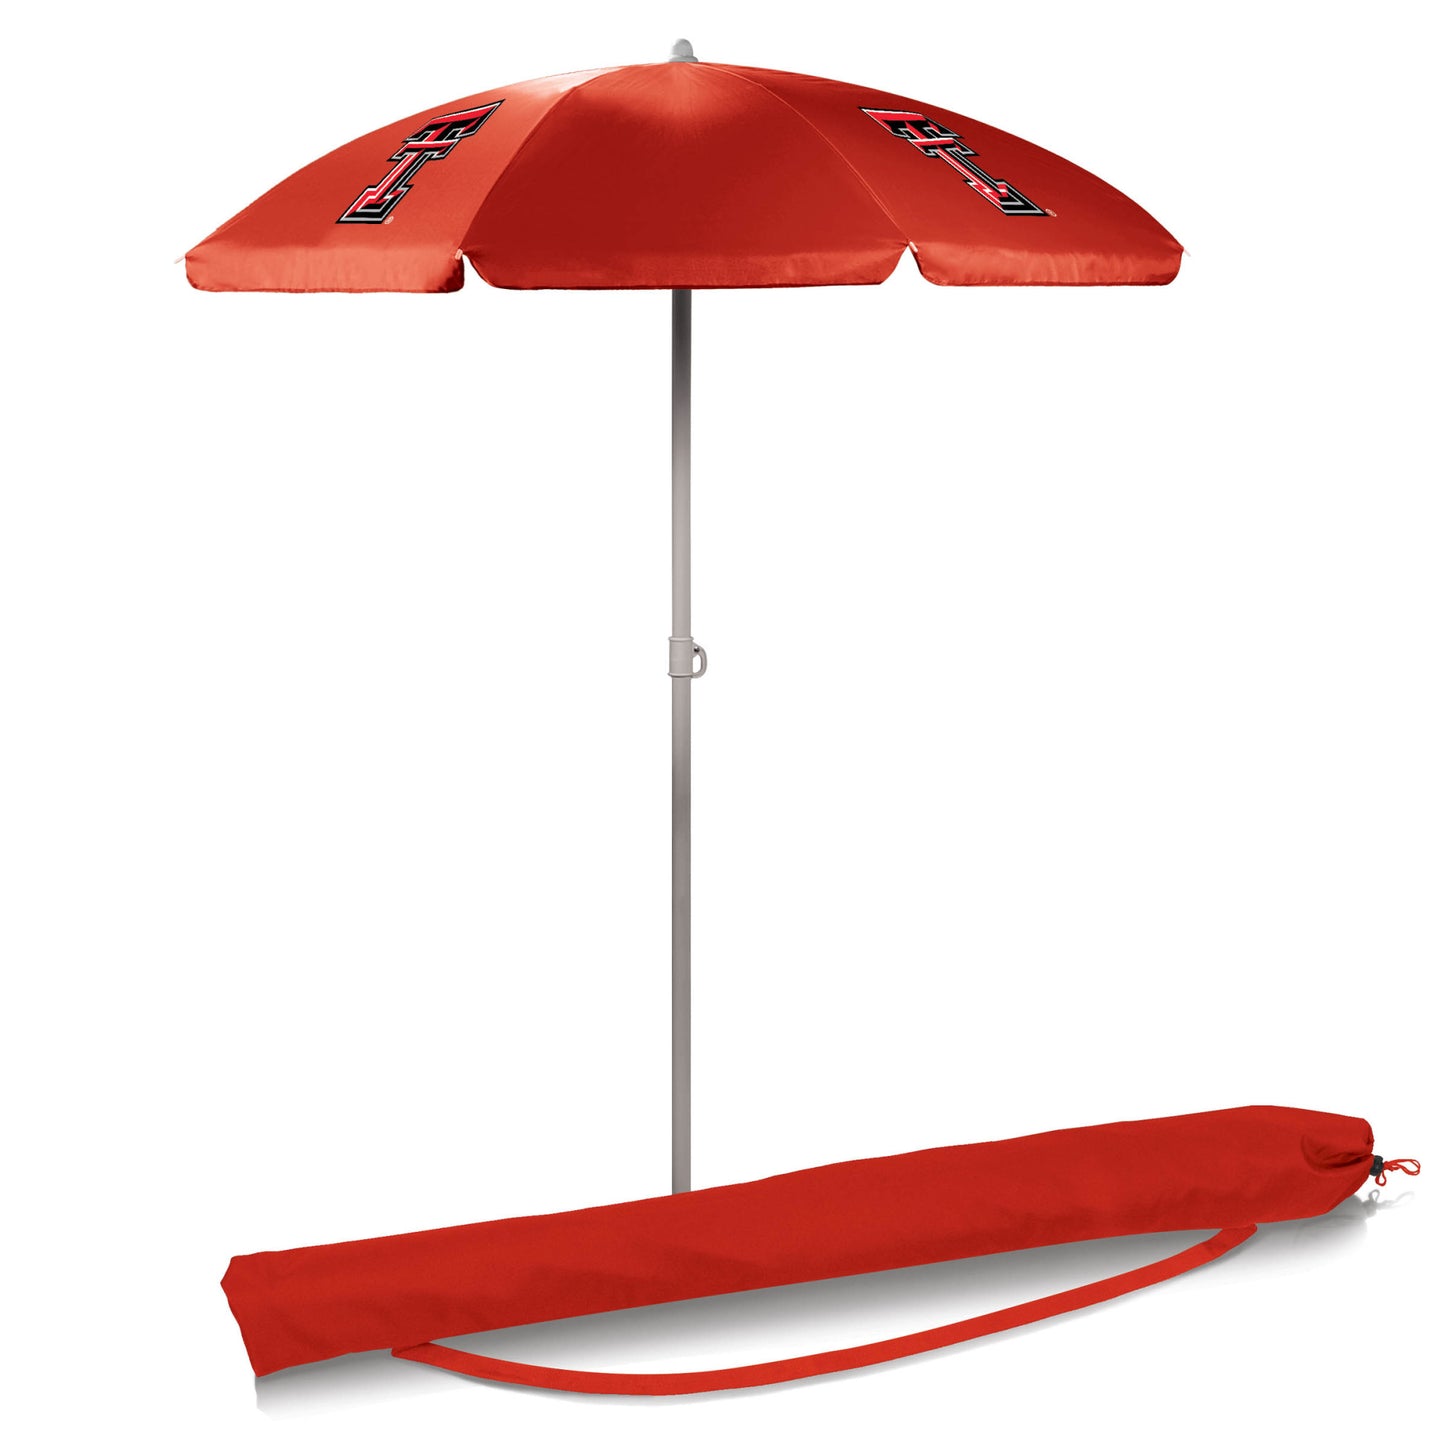 Texas Tech Red Raiders 5.5' Red Portable Beach Umbrella by Picnic Time